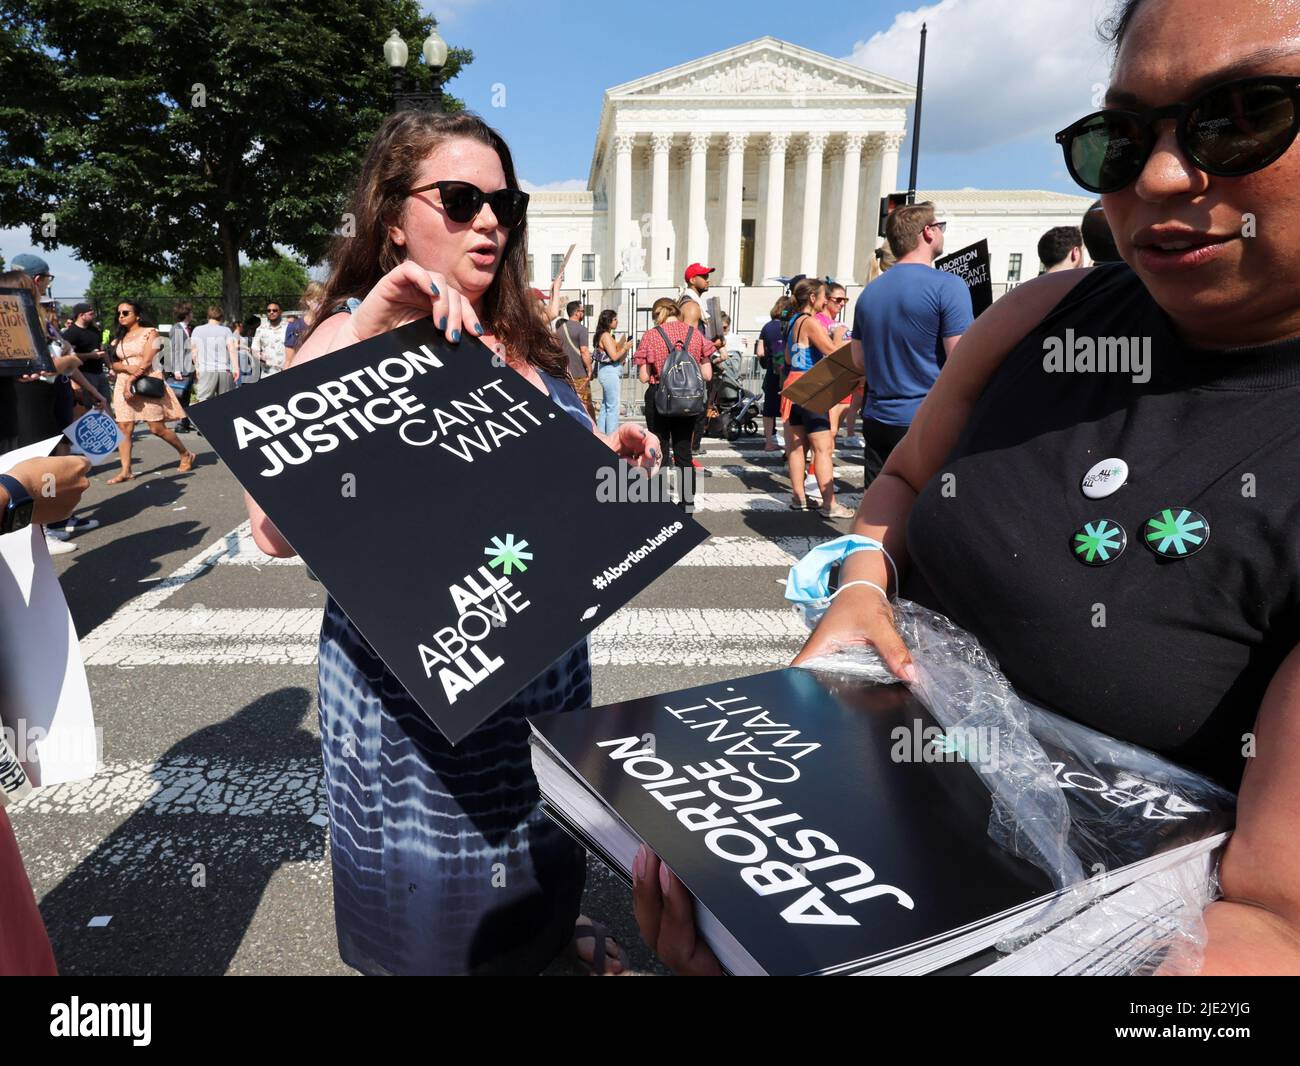 Daniela Diaz (R) from Venezuela who had an abortion in Washington, DC, hands out posters during a protest outside the United States Supreme Court as the court rules in the Dobbs v Women's Health Organization abortion case, overturning the landmark Roe v Wade abortion decision, in Washington, DC, U.S., June 24, 2022. REUTERS/Jim Bourg Stock Photo